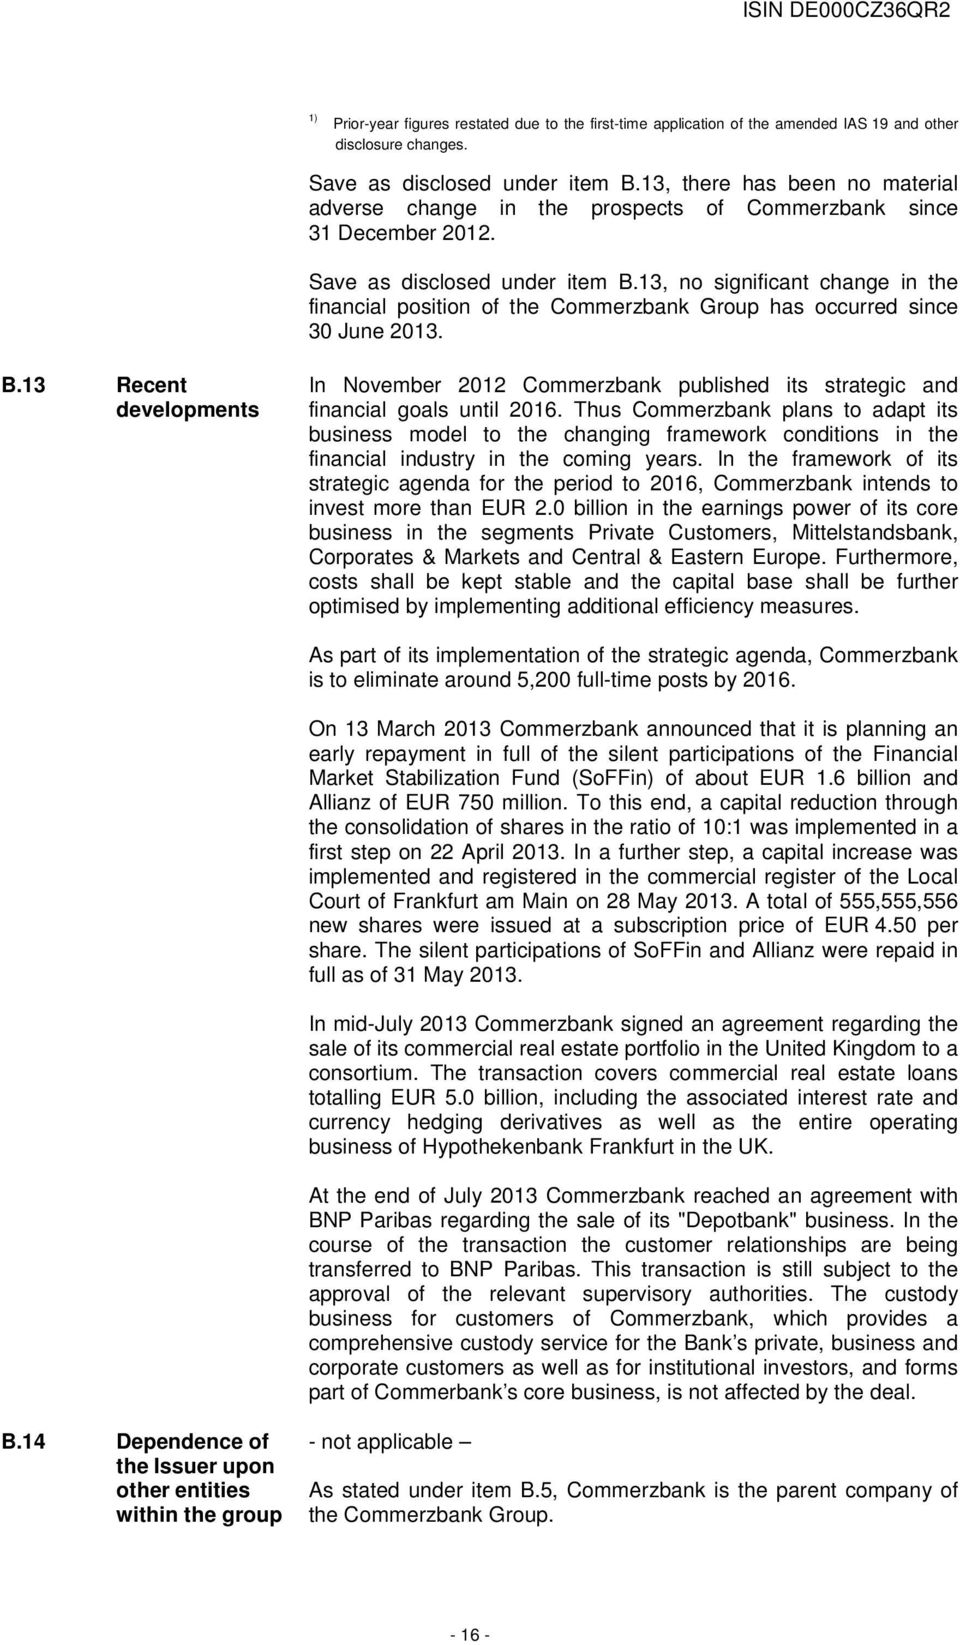 13, no significant change in the financial position of the Commerzbank Group has occurred since 30 June 2013. B.